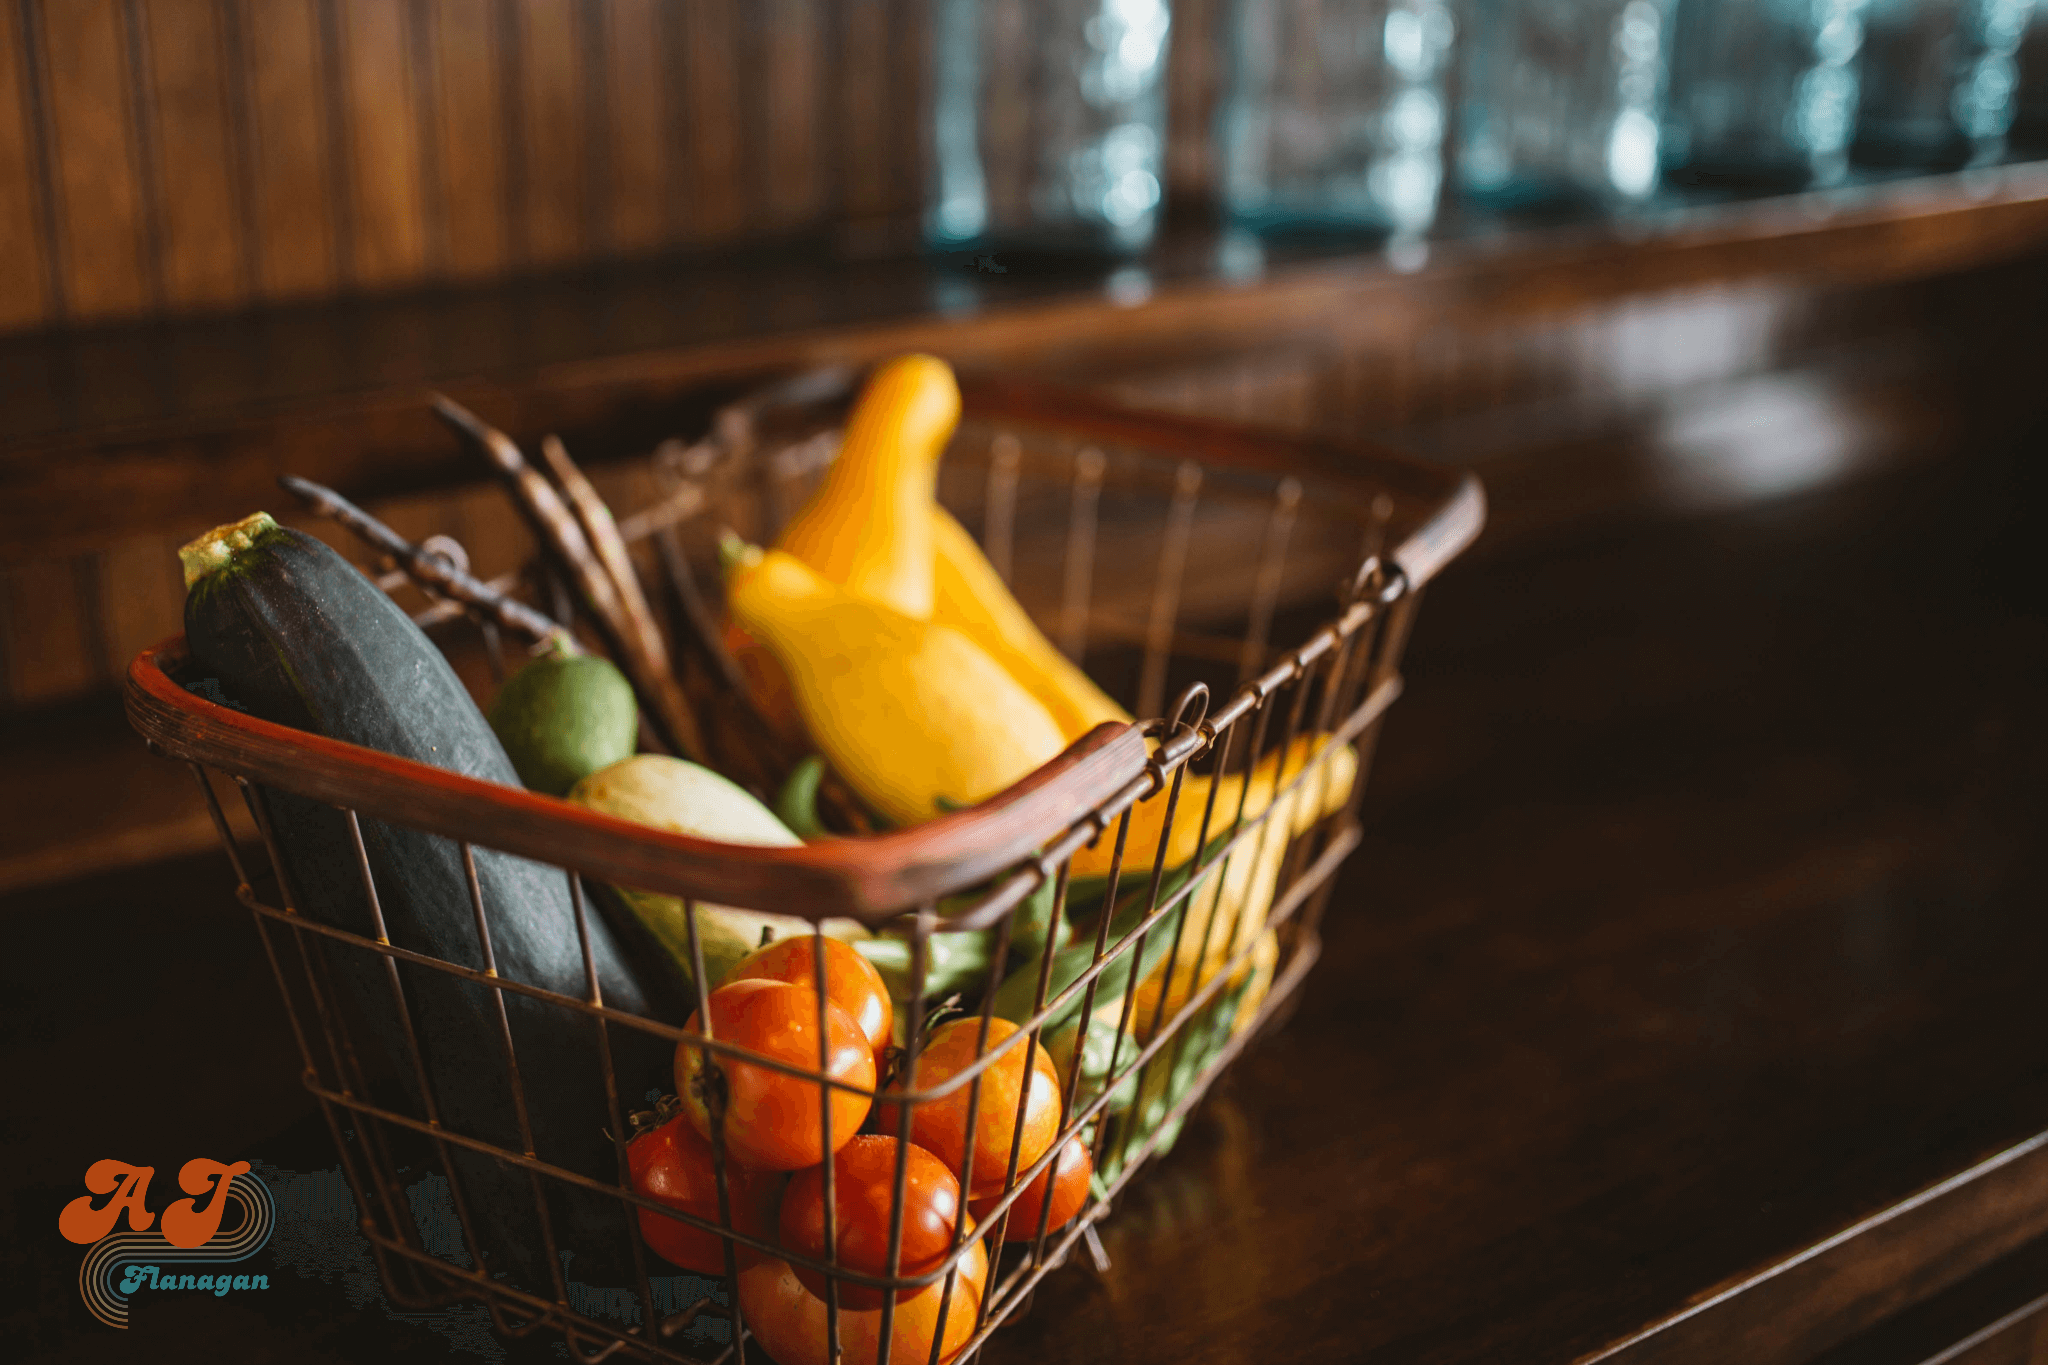 Basket of fresh produce on a kitchen counter